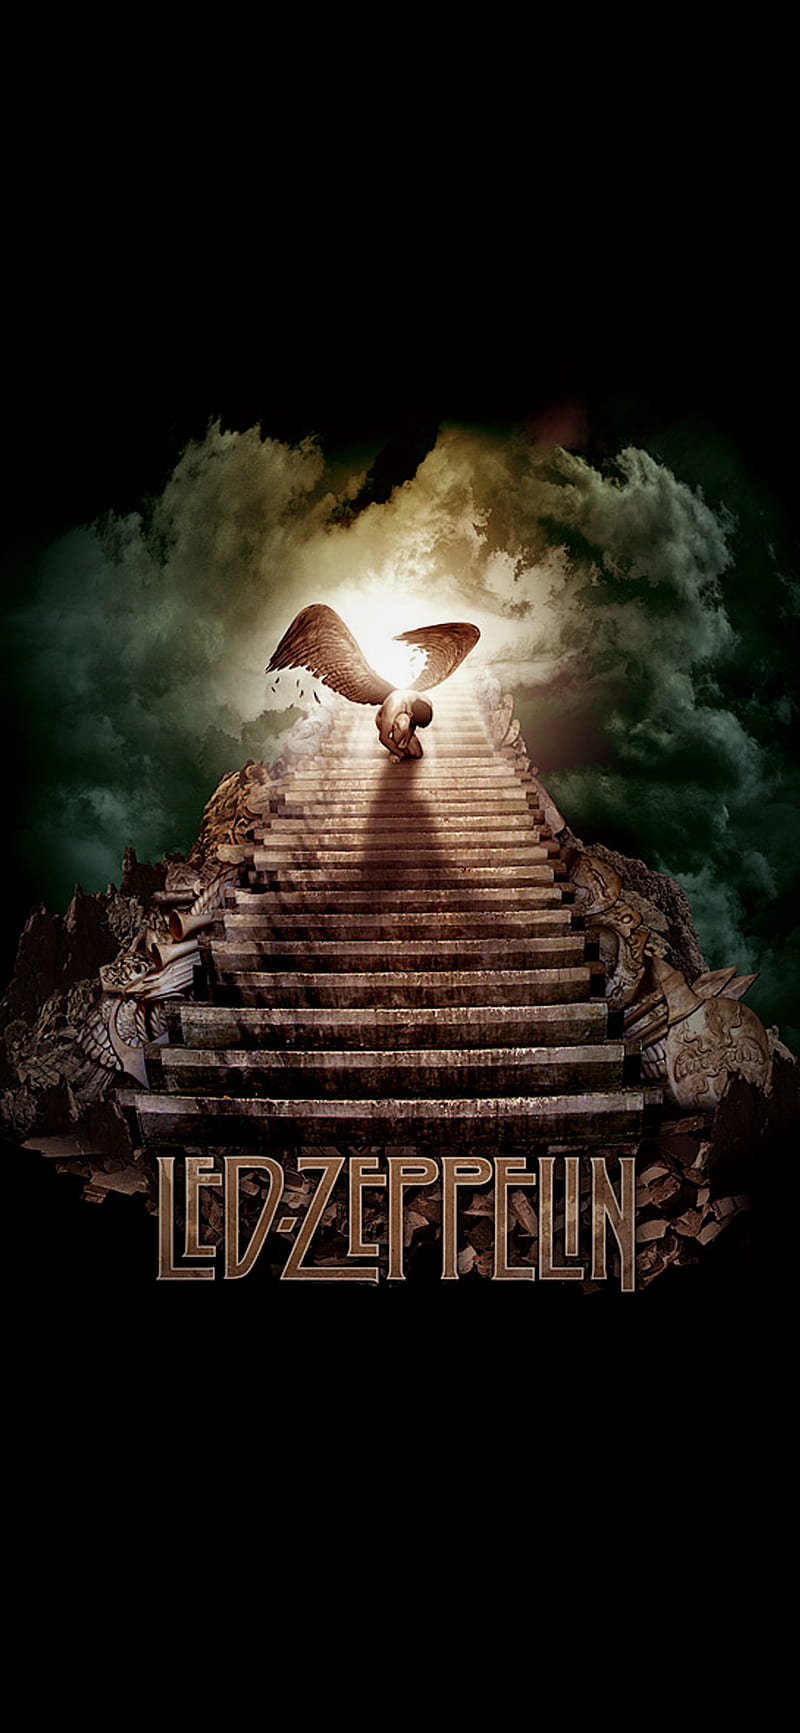 Led Zeppelin, cd cover, music, starways from heaven, HD phone wallpaper